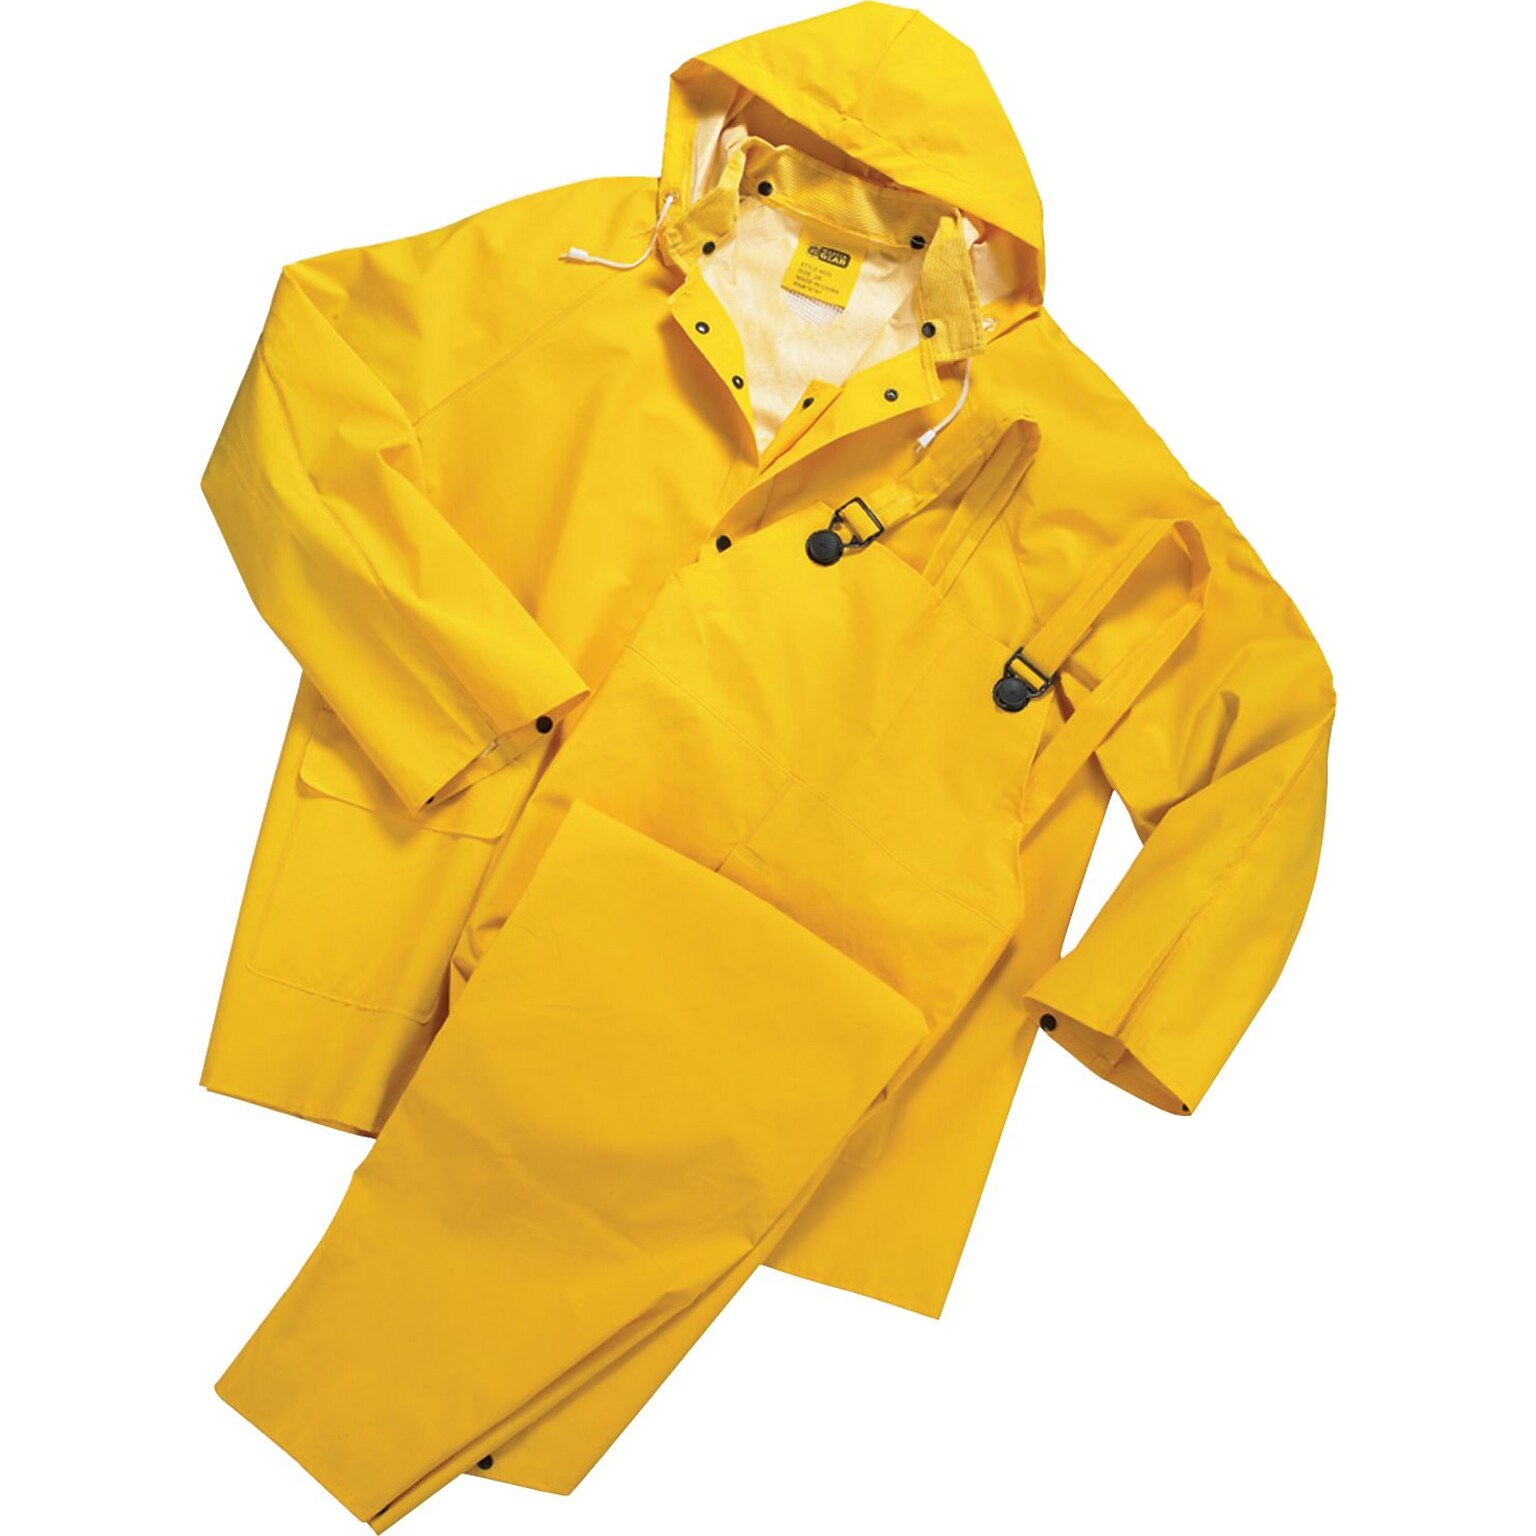 Anchor Brand Rainsuits, PVC/Polyester, L Size, Front Closure, Yellow